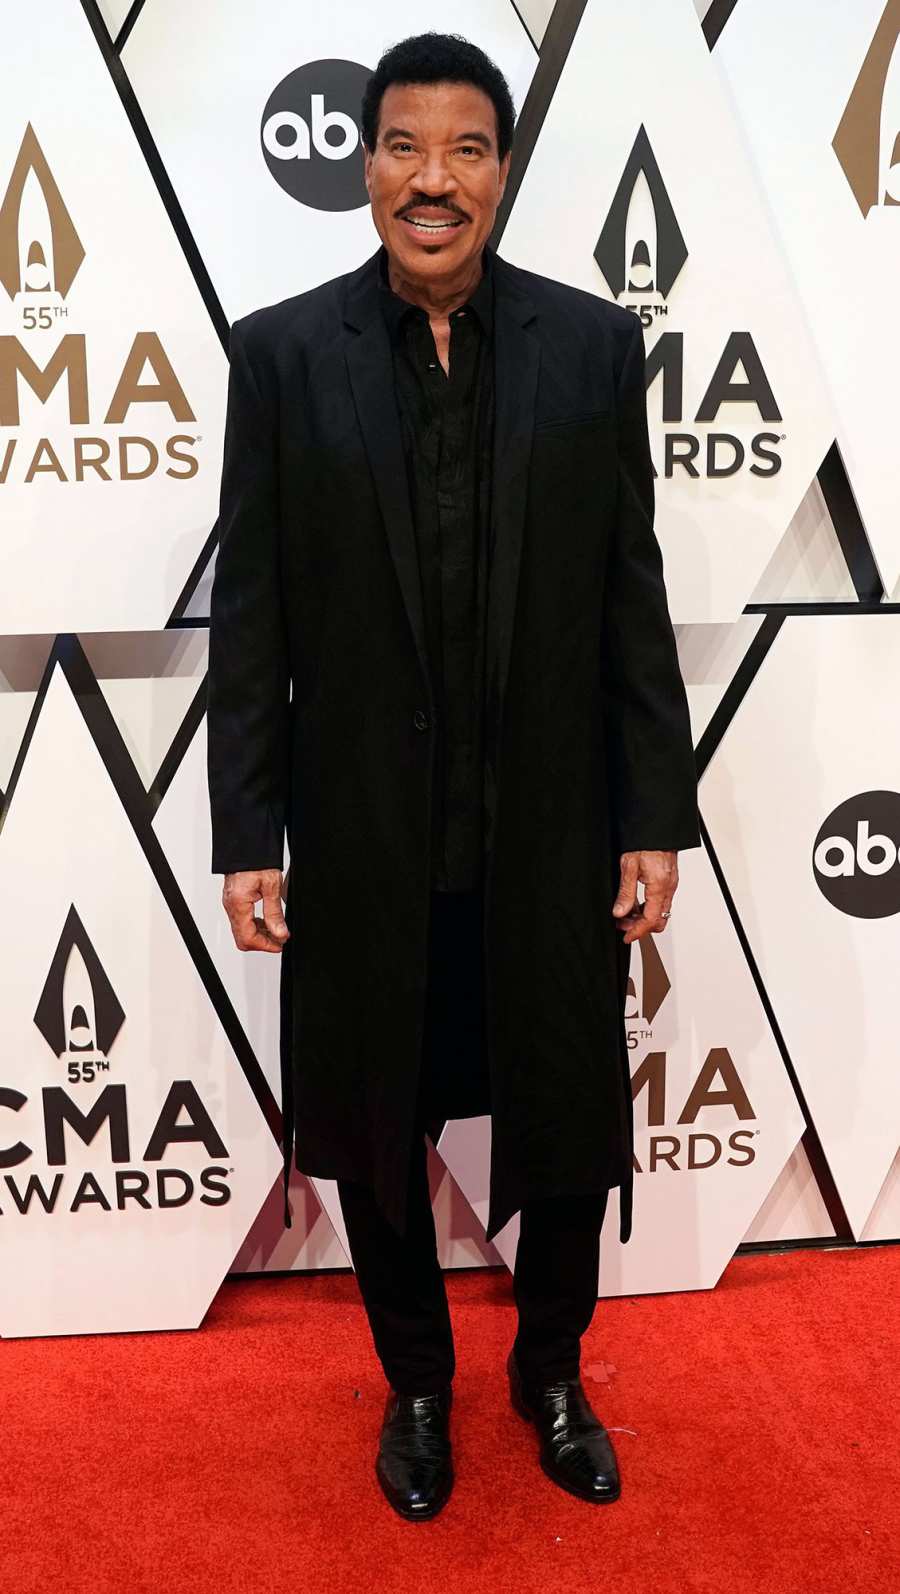 Lionel Ritchie These Were the Best Dressed Hottest Men at the 2021 CMA Awards